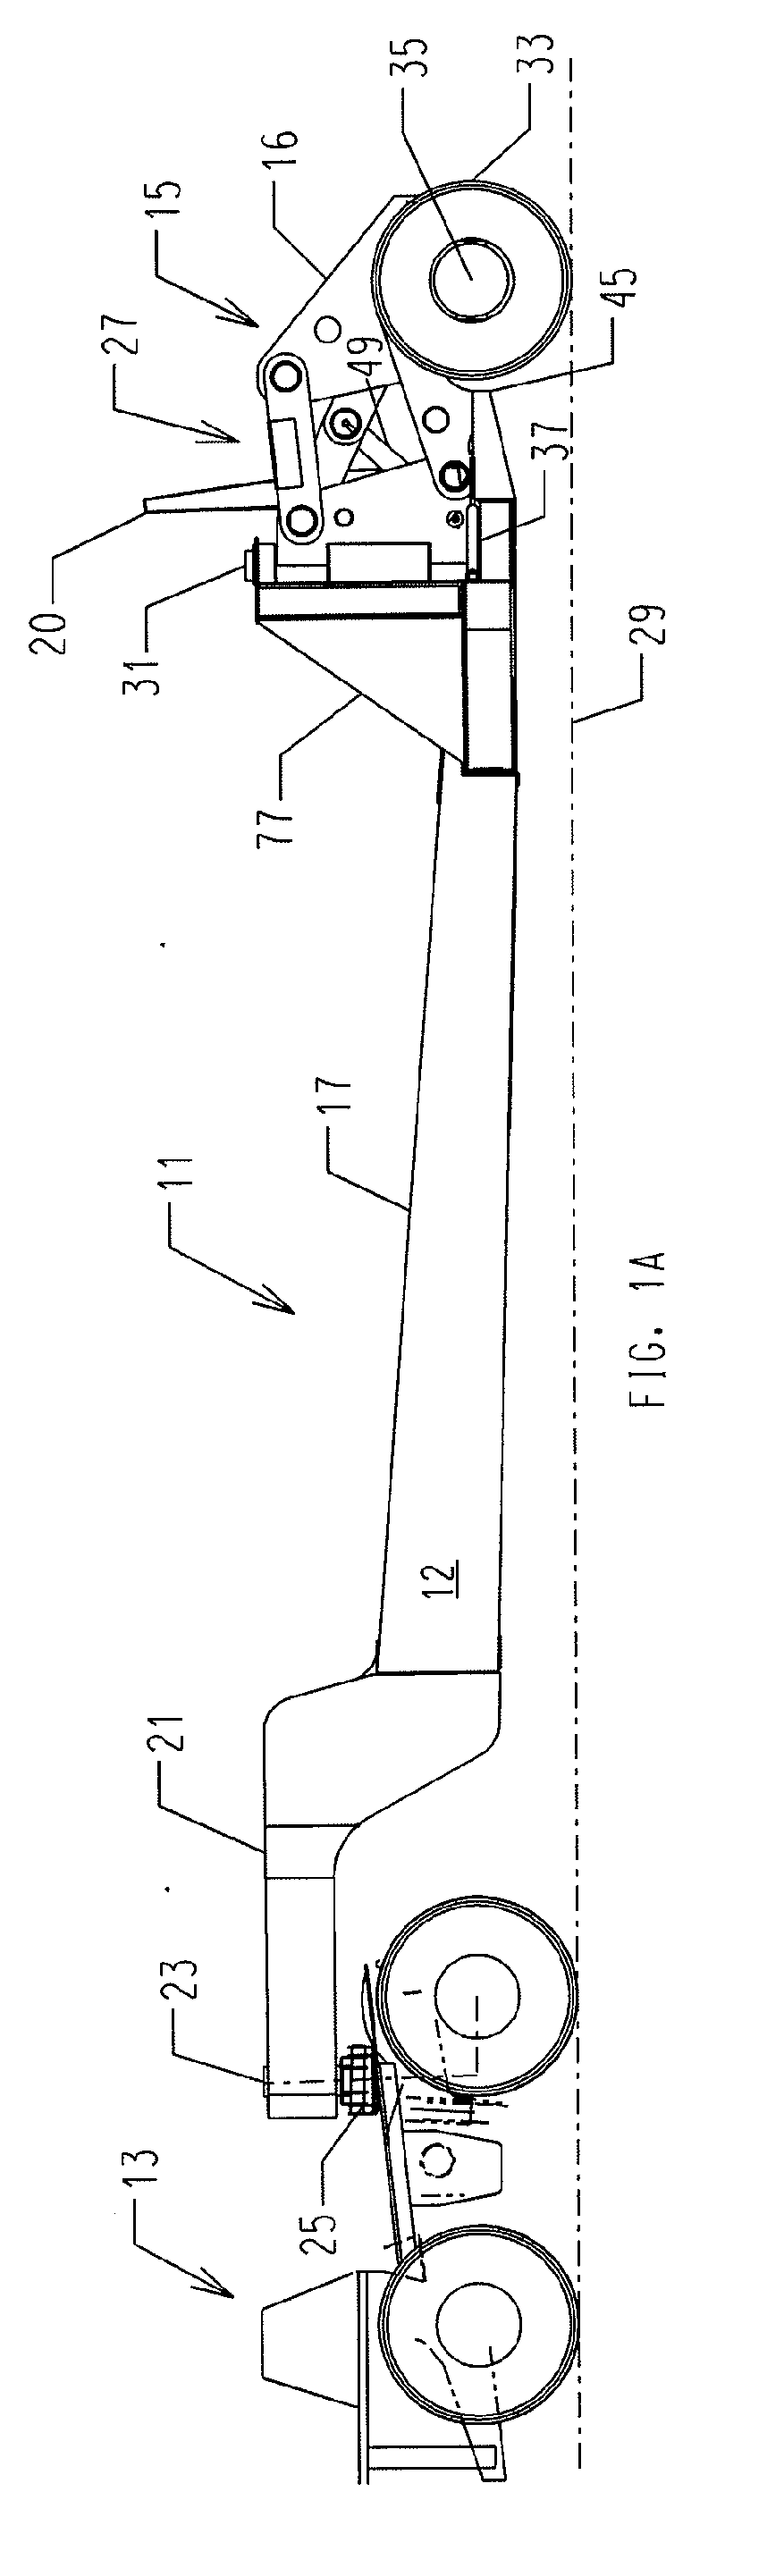 Method and apparatus for transitioning a heavy equipment hauling rear loading trailer between transport and loading positions